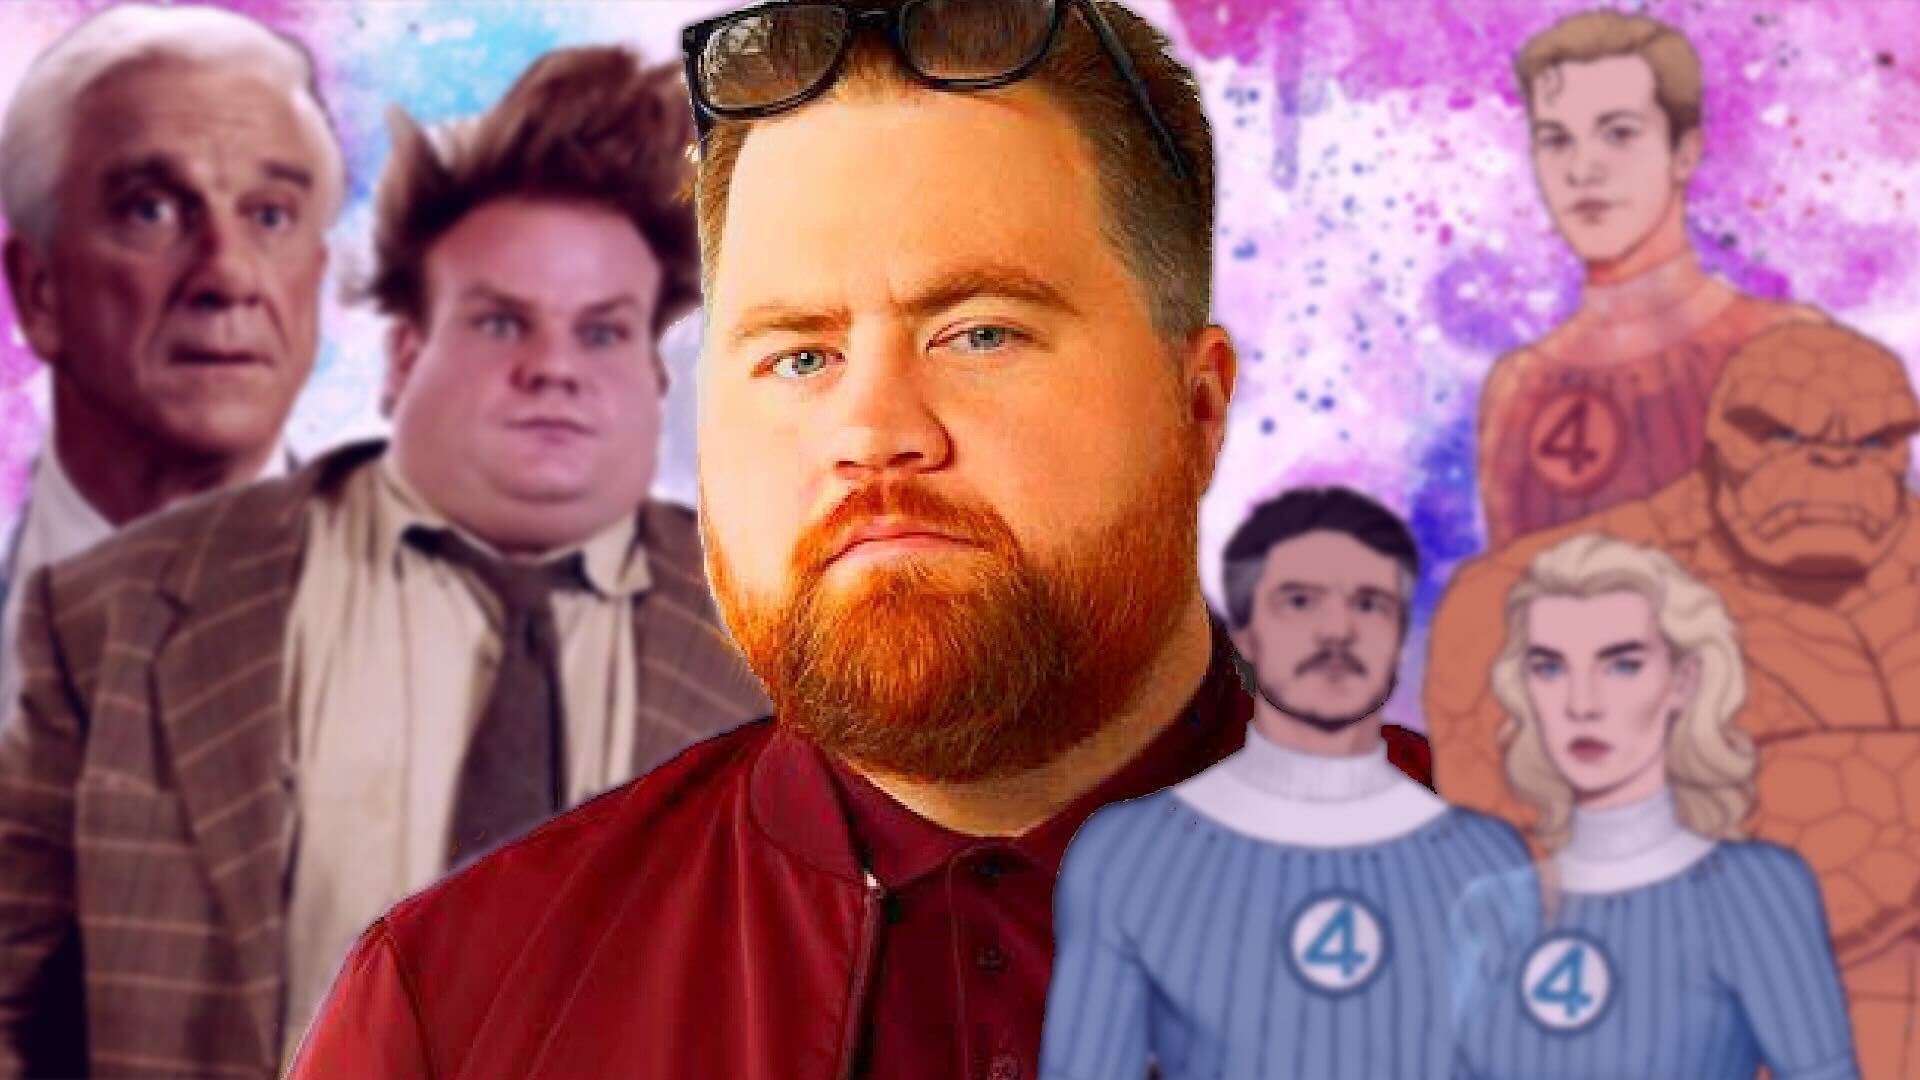 Paul Walter Hauser Scores Big Triple Casting With Naked Gun, Fantastic 4 and Chris Farley Biopic Roles